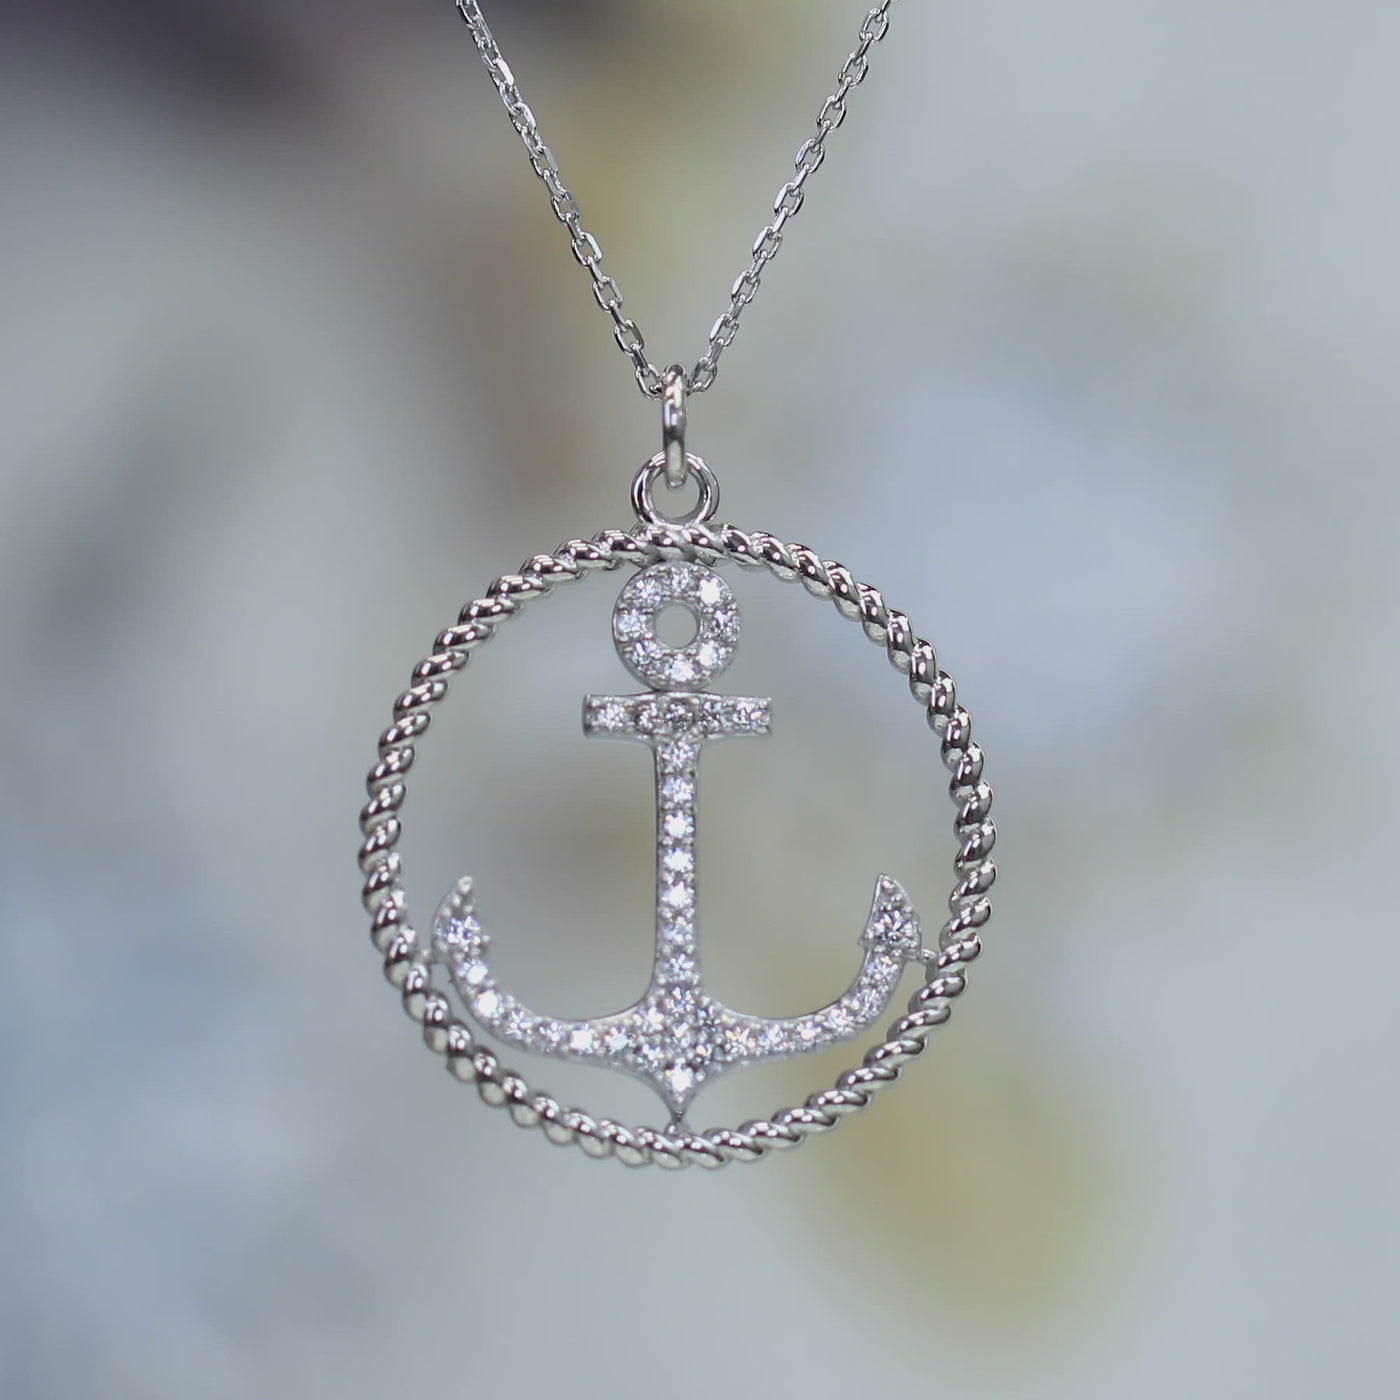 Anchor Pendant Chain Necklace, Platinum Plated Sterling Silver